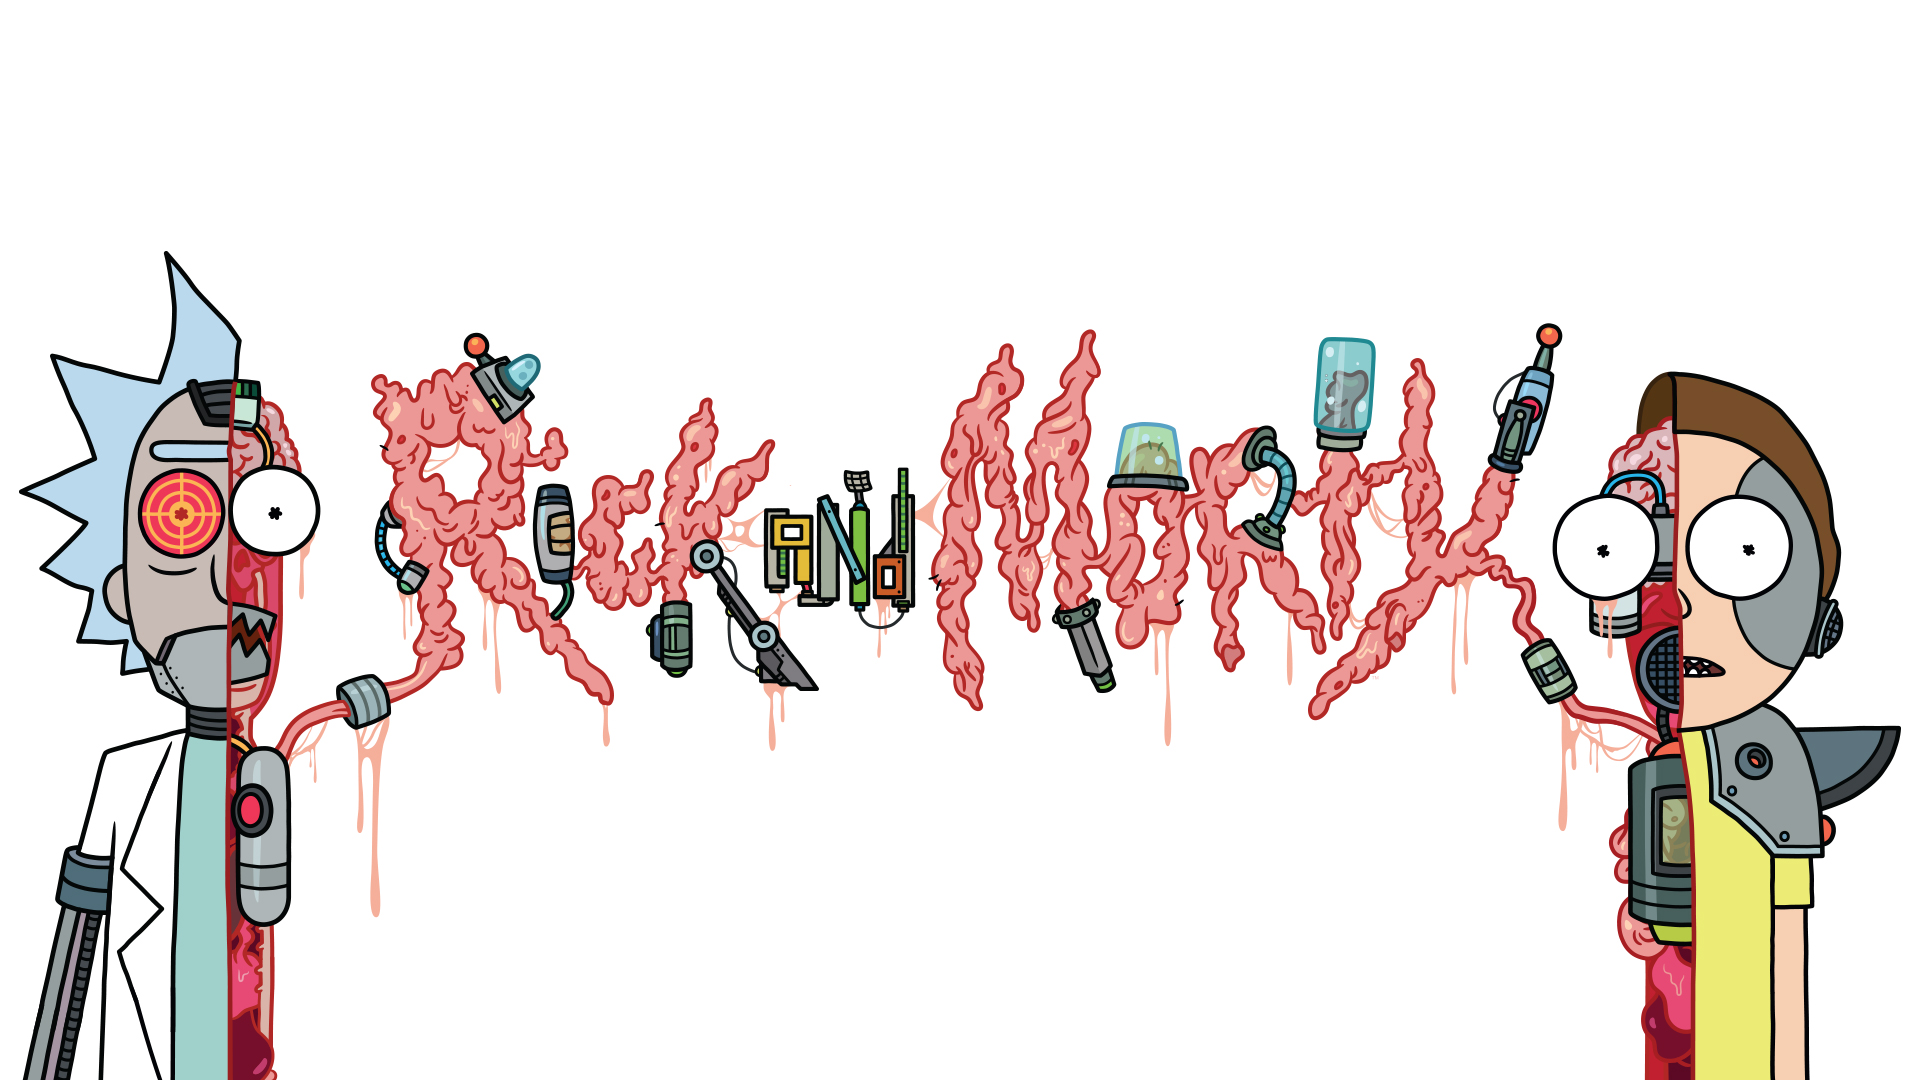 Rick and Morty returns for season 5 on Sunday, June 20 at 11pm ET/PT on Adu...